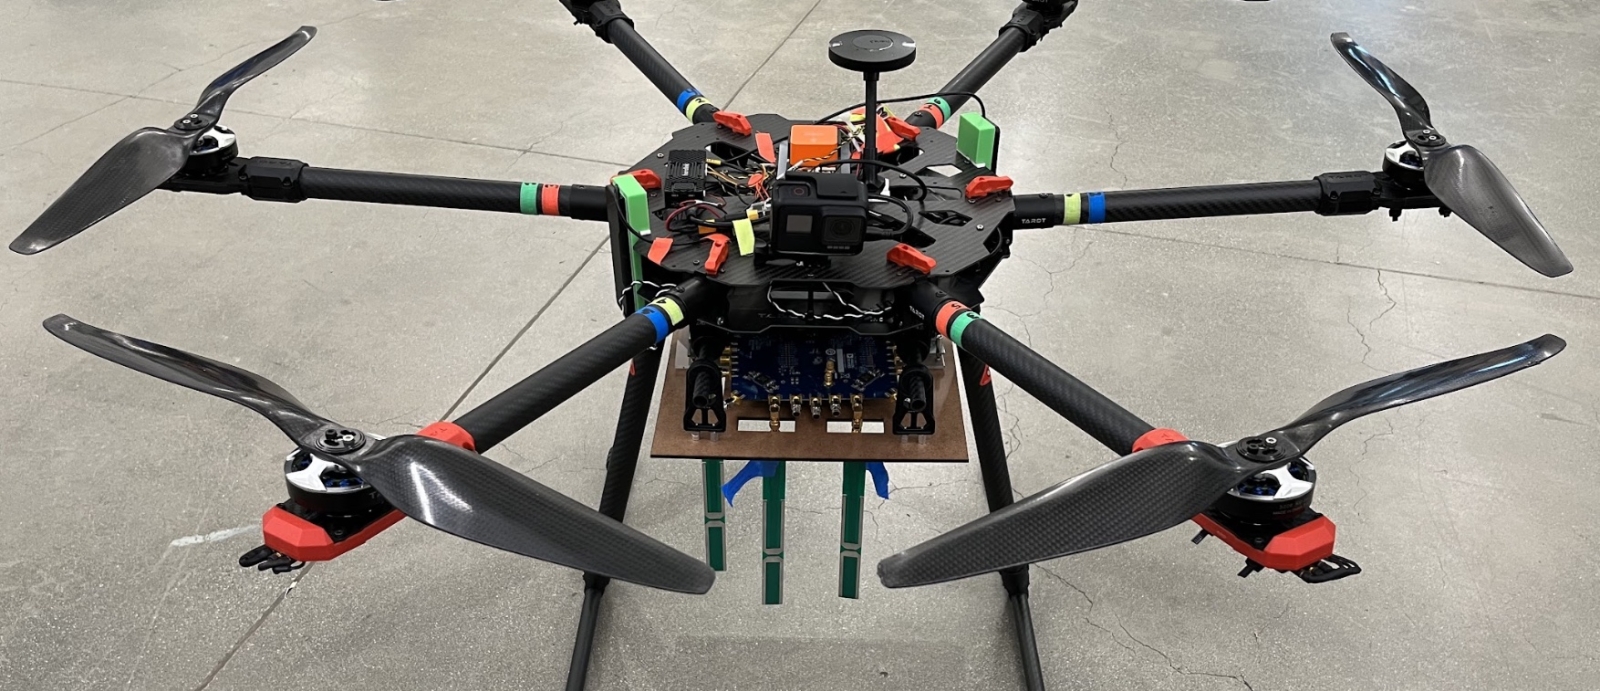 Photo of the student team's Spring drone.